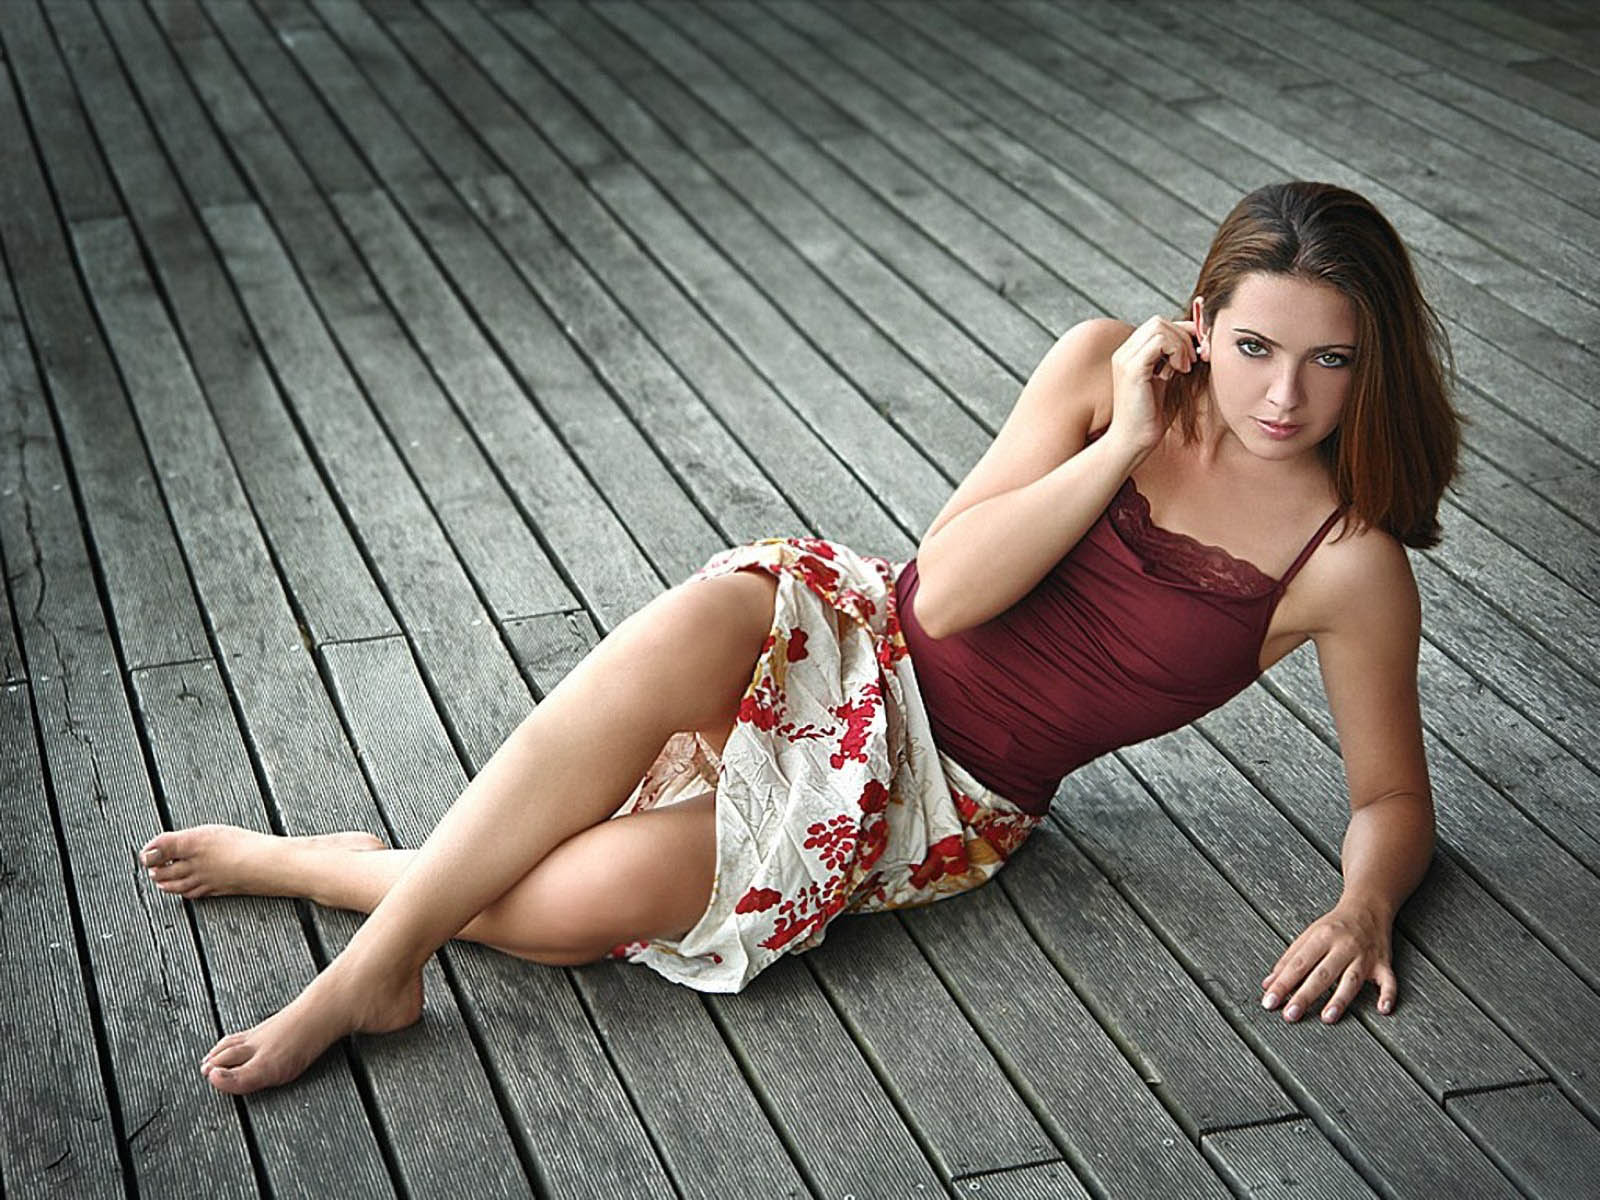 Amazing TV Show Image, Beautiful Brunette Lying on Plywood, Appealing Pose 1600X1200 free wallpaper